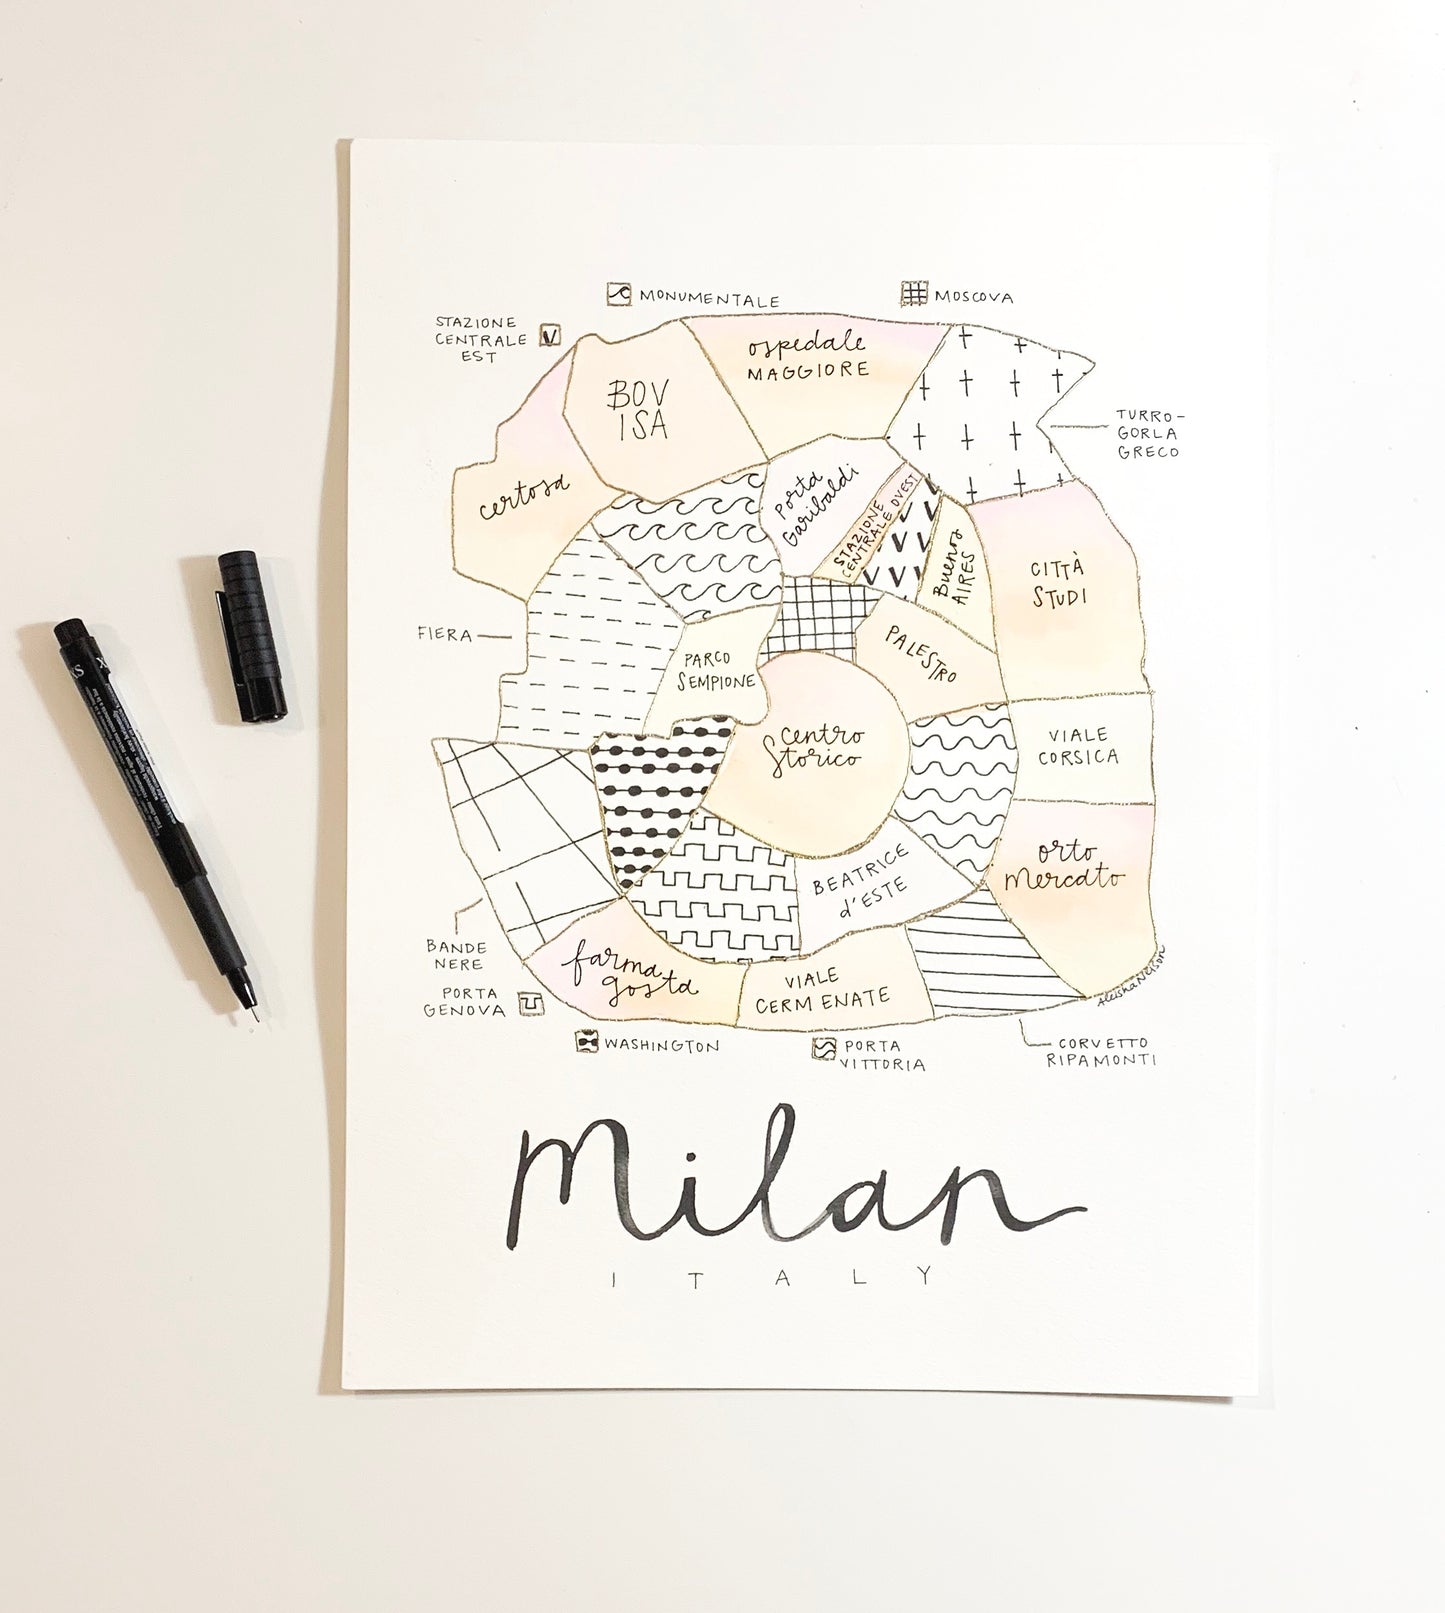 Hand Painted Milan Map